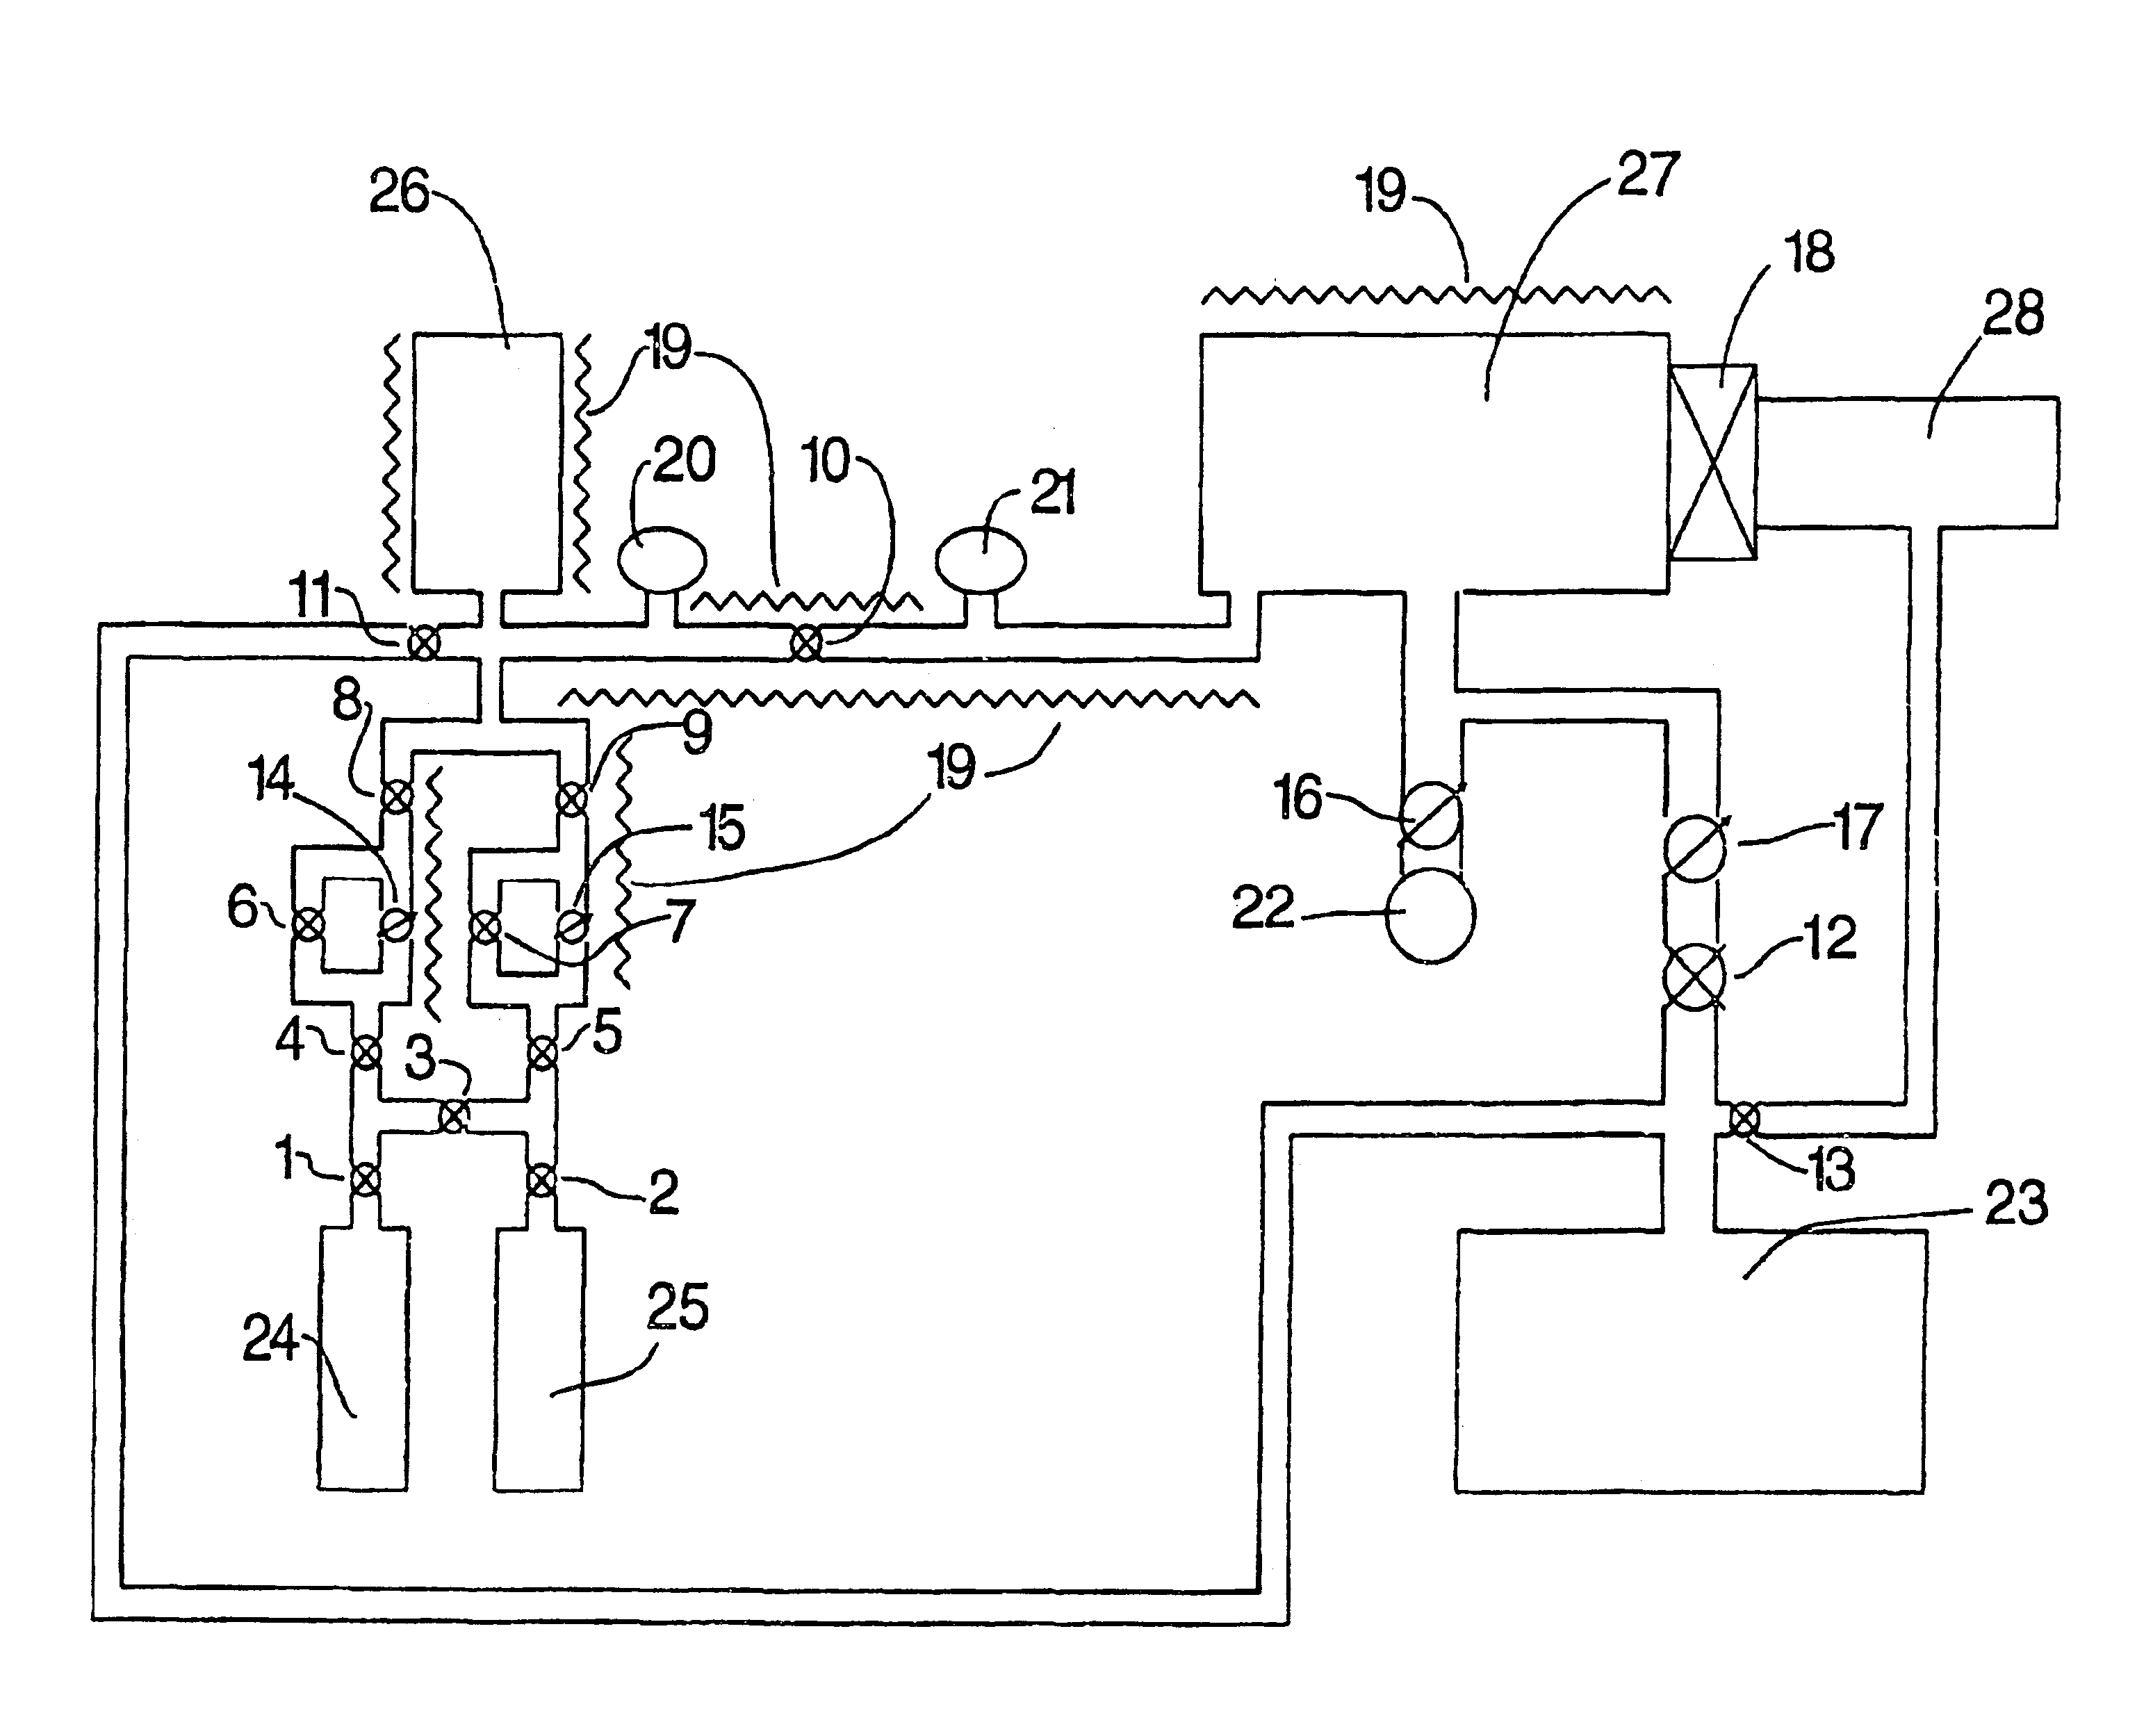 Apparatus for etching semiconductor samples and a source for providing a gas by sublimation thereto